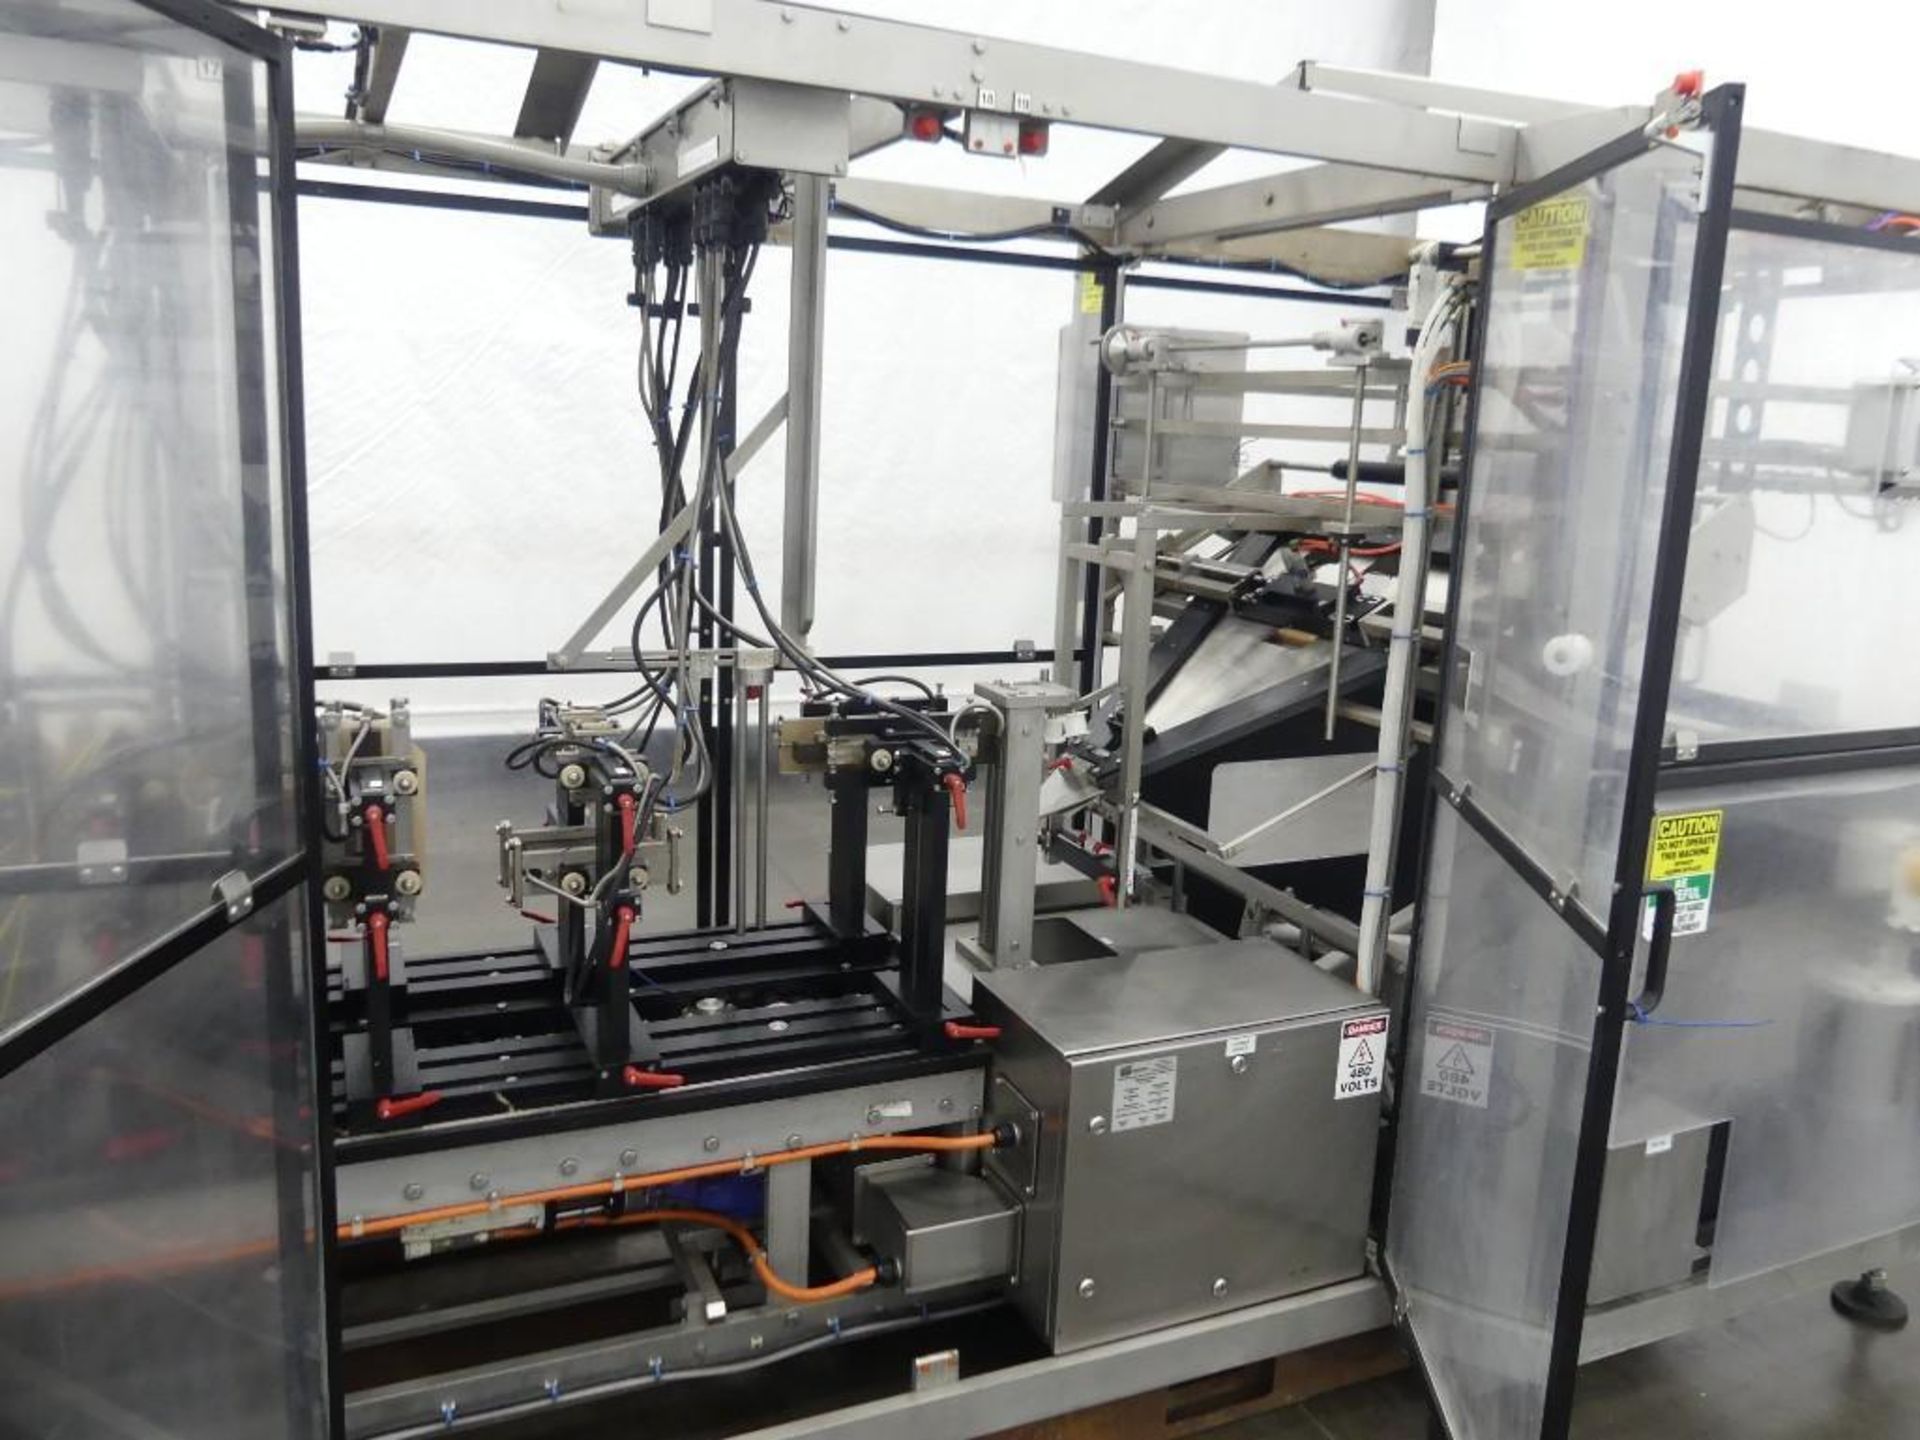 Massman HFFS-IM1000 Flexible Pouch Packaging System - Image 51 of 127